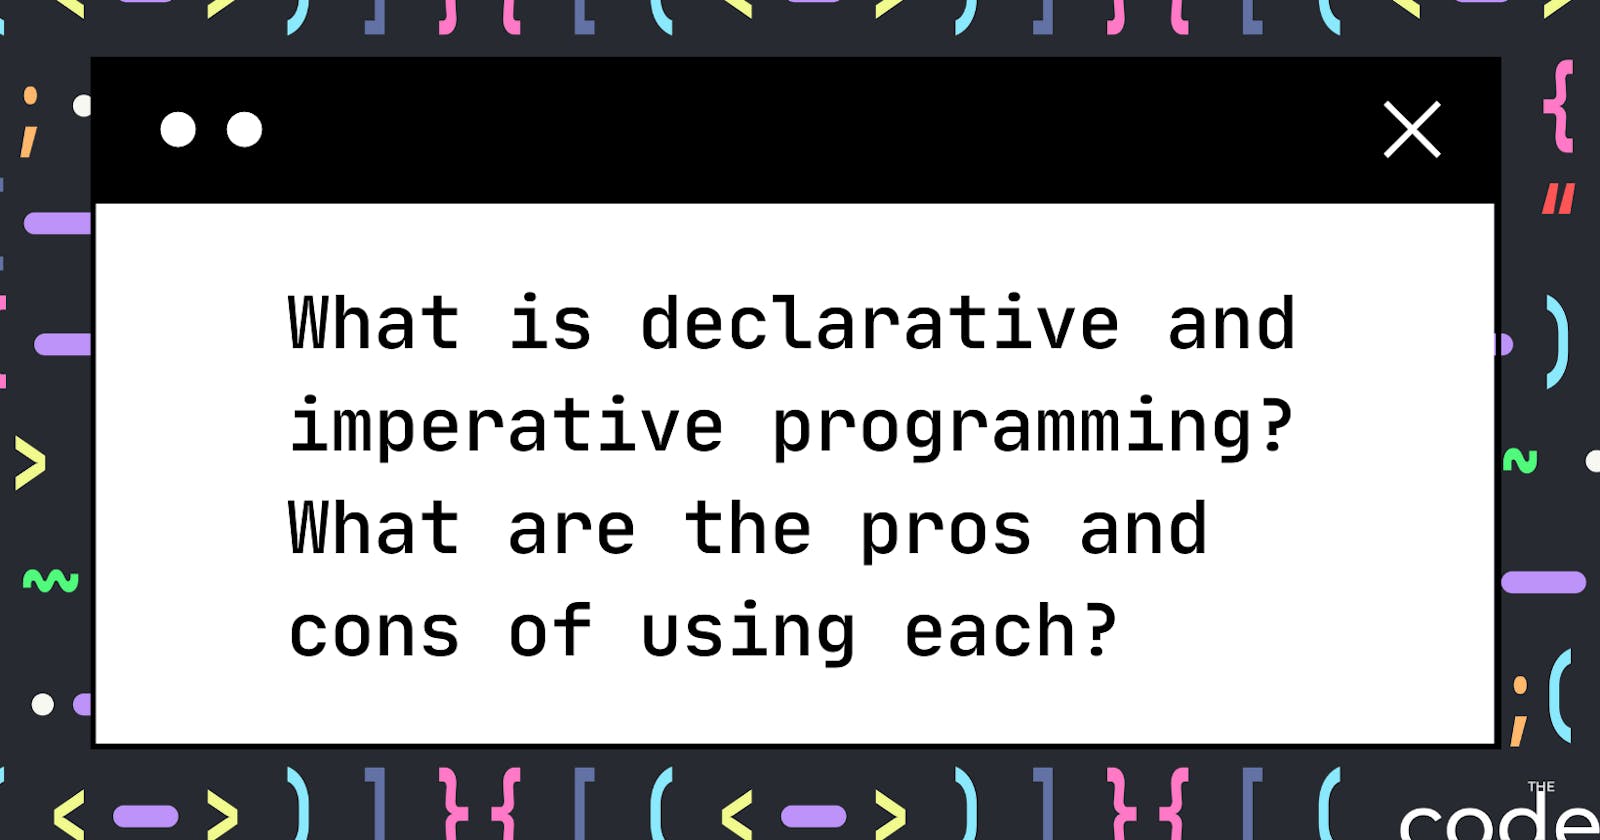 What is declarative and imperative programming? What are the pros and cons of using each?